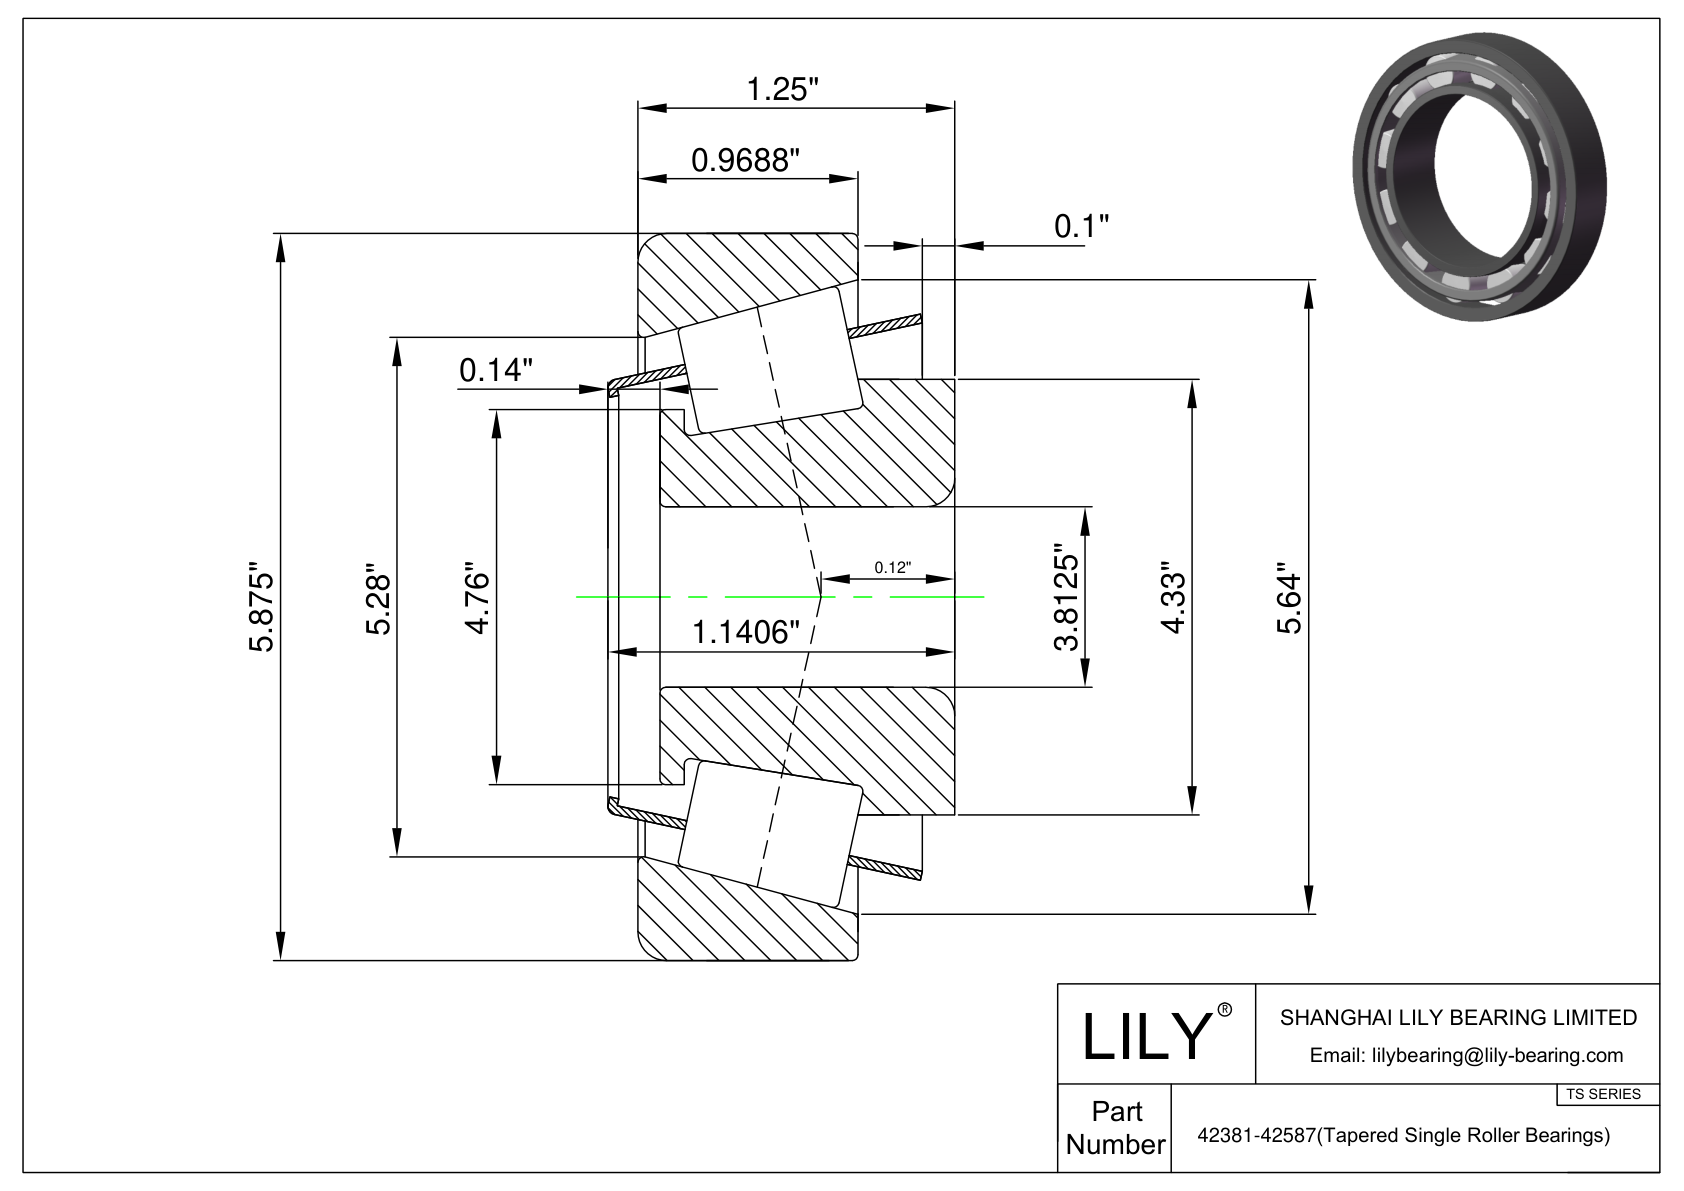 42381-42587 TS (Tapered Single Roller Bearings) (Imperial) cad drawing